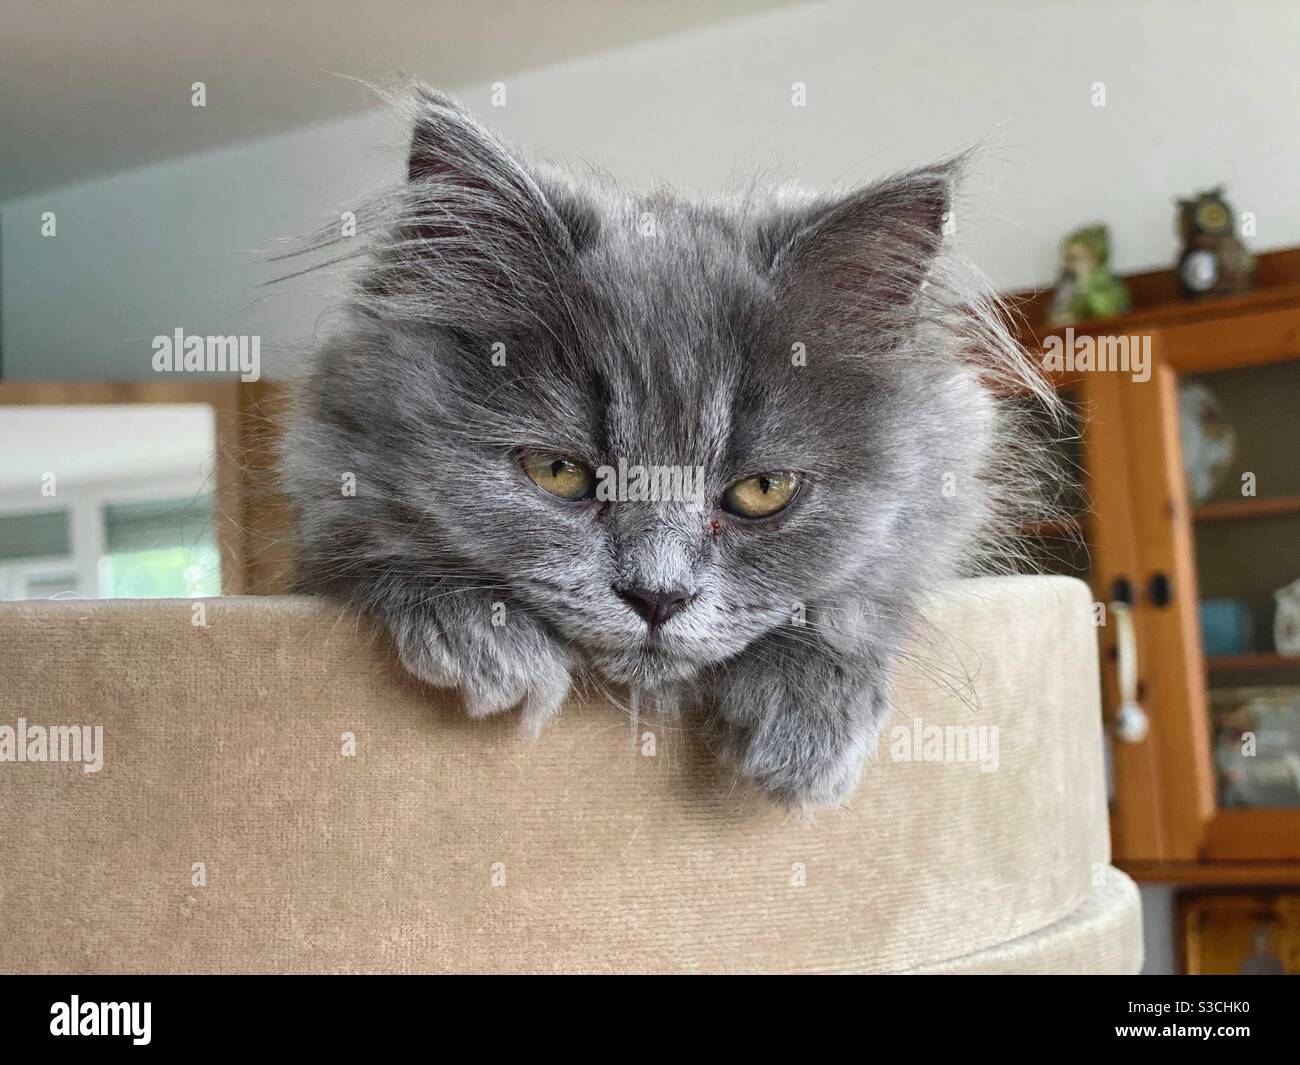 3 months old Blue Persian kitten head looking down from the top of a cat tree. Stock Photo